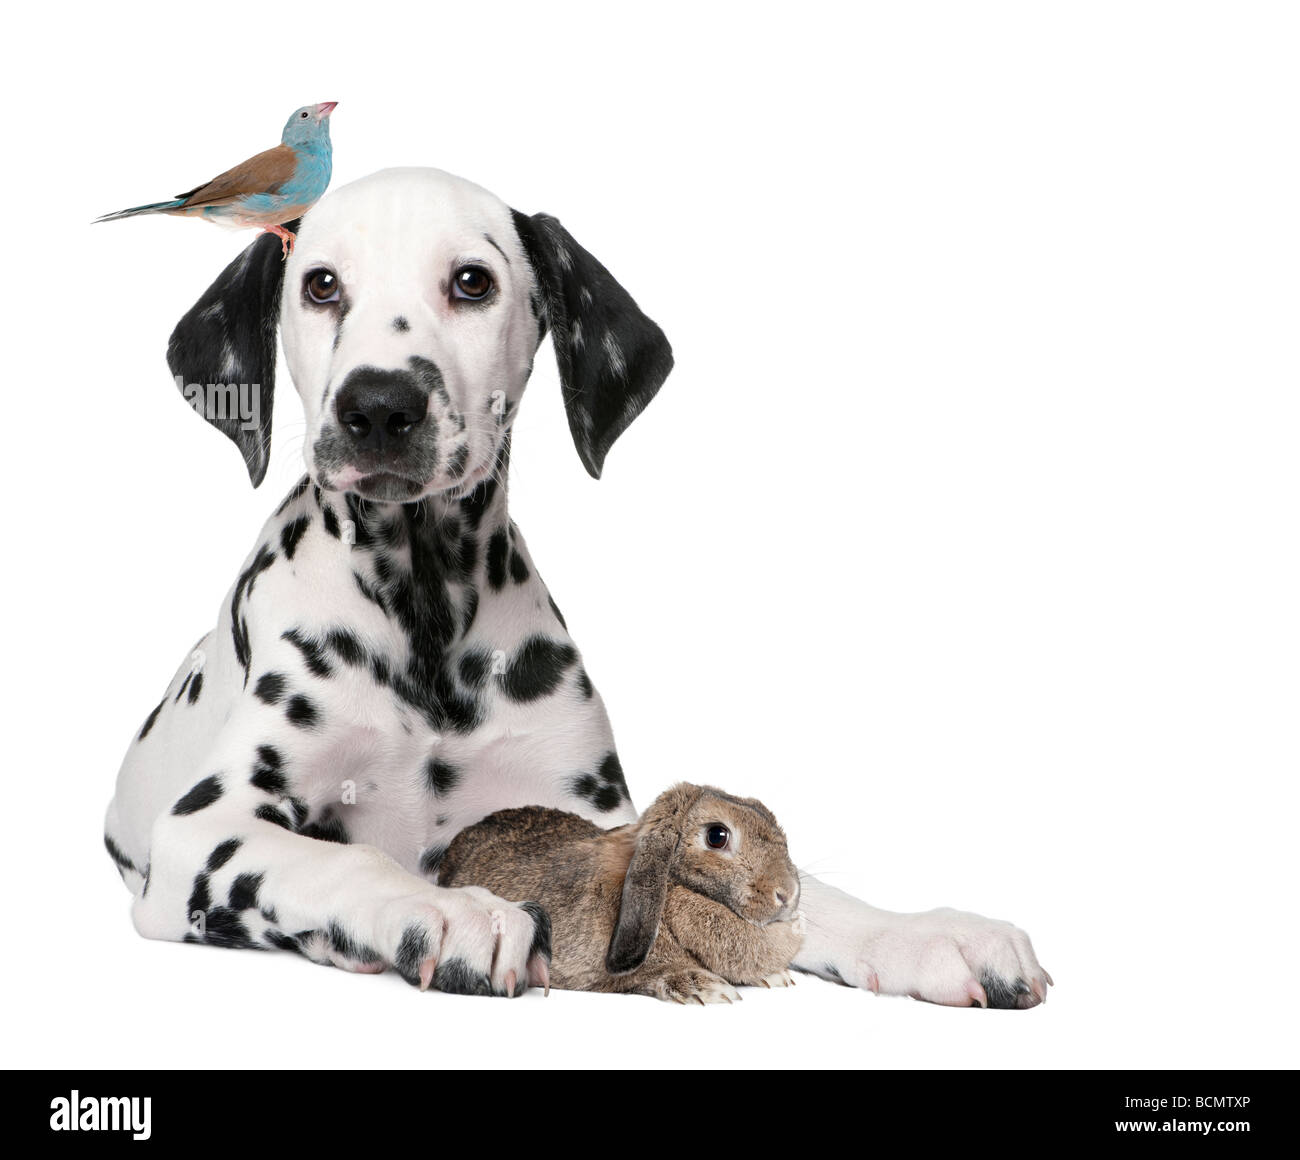 Group of pets, puppy dog, bird, rabbit, in front of white background, studio shot Stock Photo